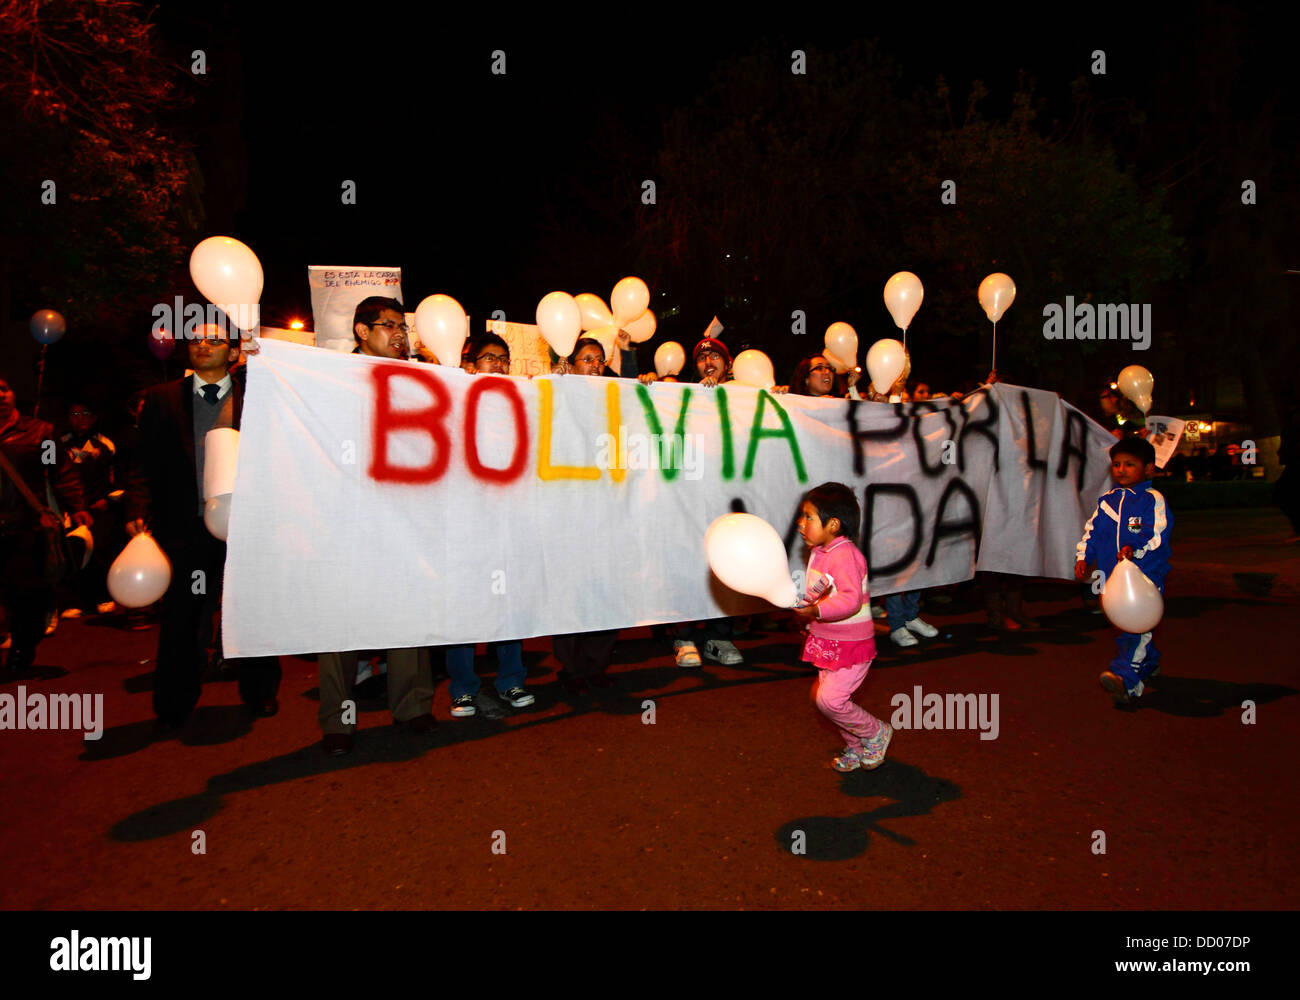 LA PAZ, BOLIVIA, 22nd August 2013. People take part in a march organised by the Red Pro-Vida (Pro Life Network) to protest against decriminalising abortion. Bolivia has been debating whether to decriminalise abortion since March 2012. Credit:James Brunker / Alamy Live News Stock Photo